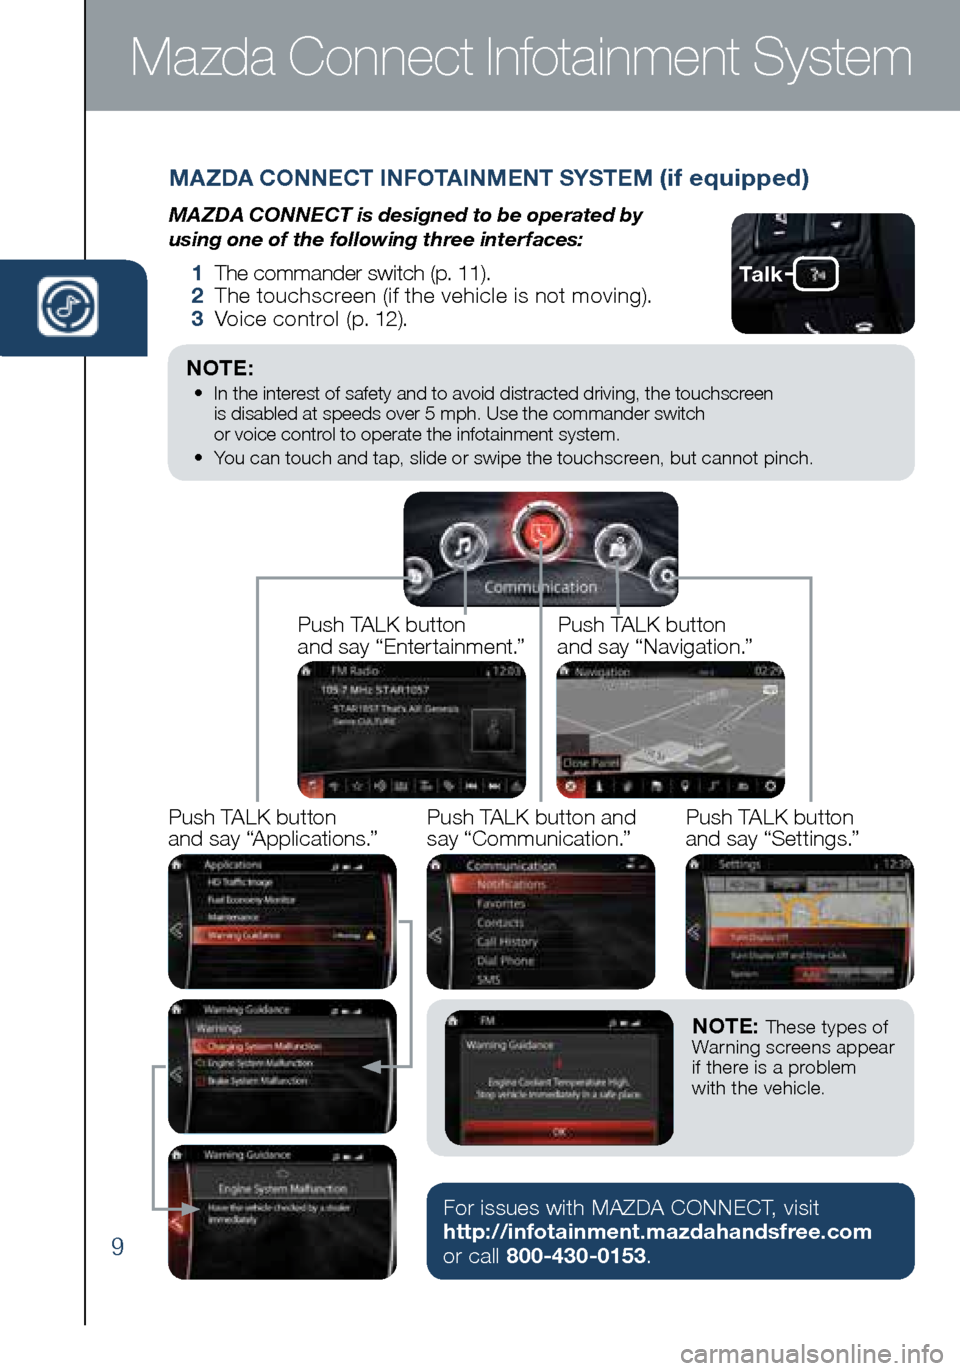 MAZDA MODEL 3 HATCHBACK 2016  Smart Start Guide (in English) 9
MAZDA CONNECT INFOTAINMENT SYSTEM (if equipped)
MAZDA CONNECT is designed to be operated by  
using one of the following three interfaces:
  1   The commander switch (p. 11).
    2   The touchscreen